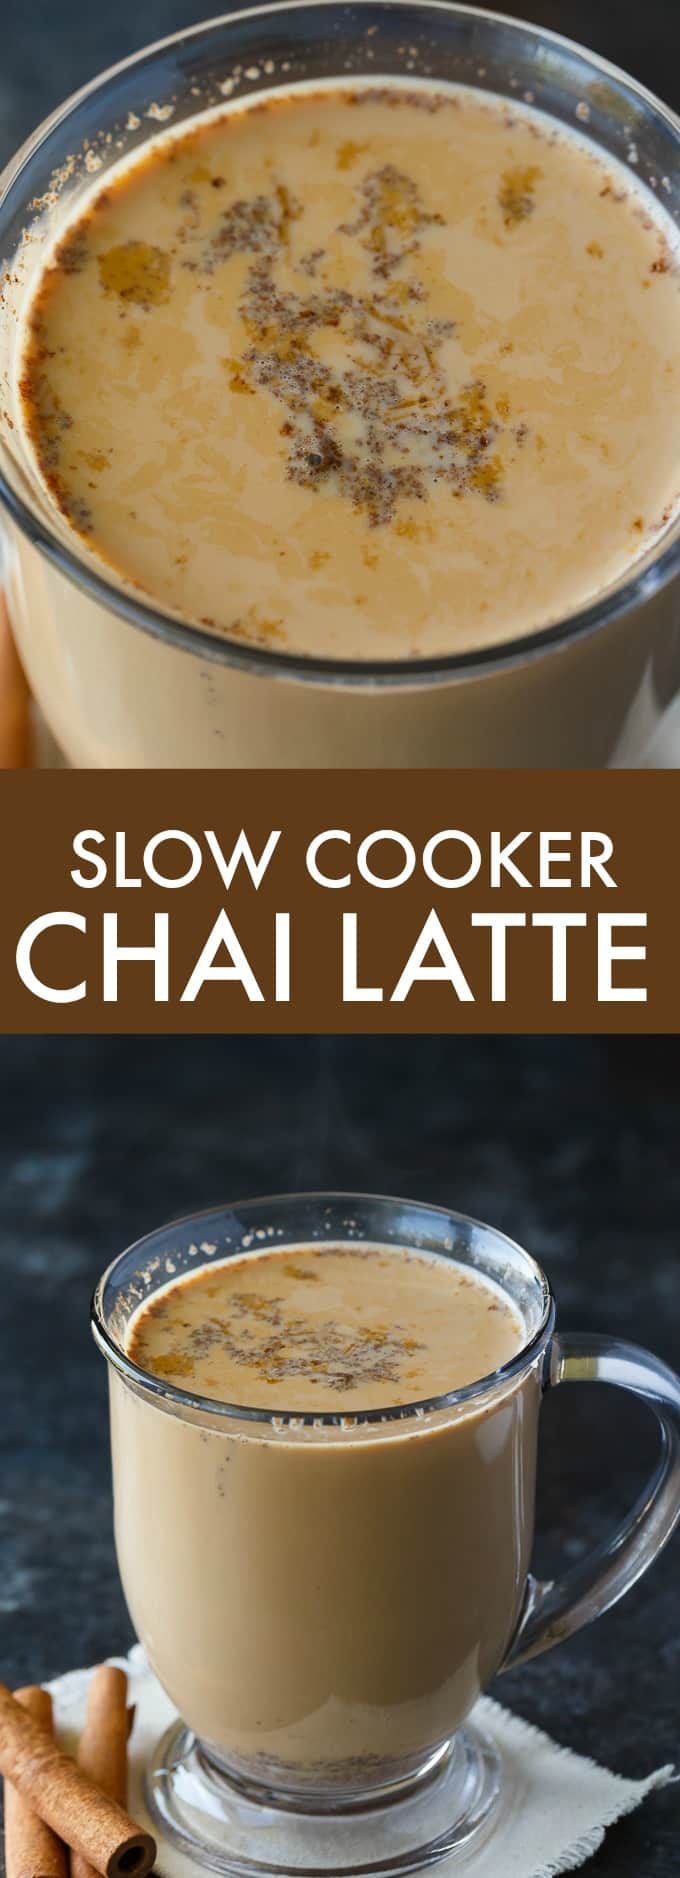 Slow Cooker Chai Latte - Sweet and spicy! This cozy drink is perfect for cold nights curled up with a good book.